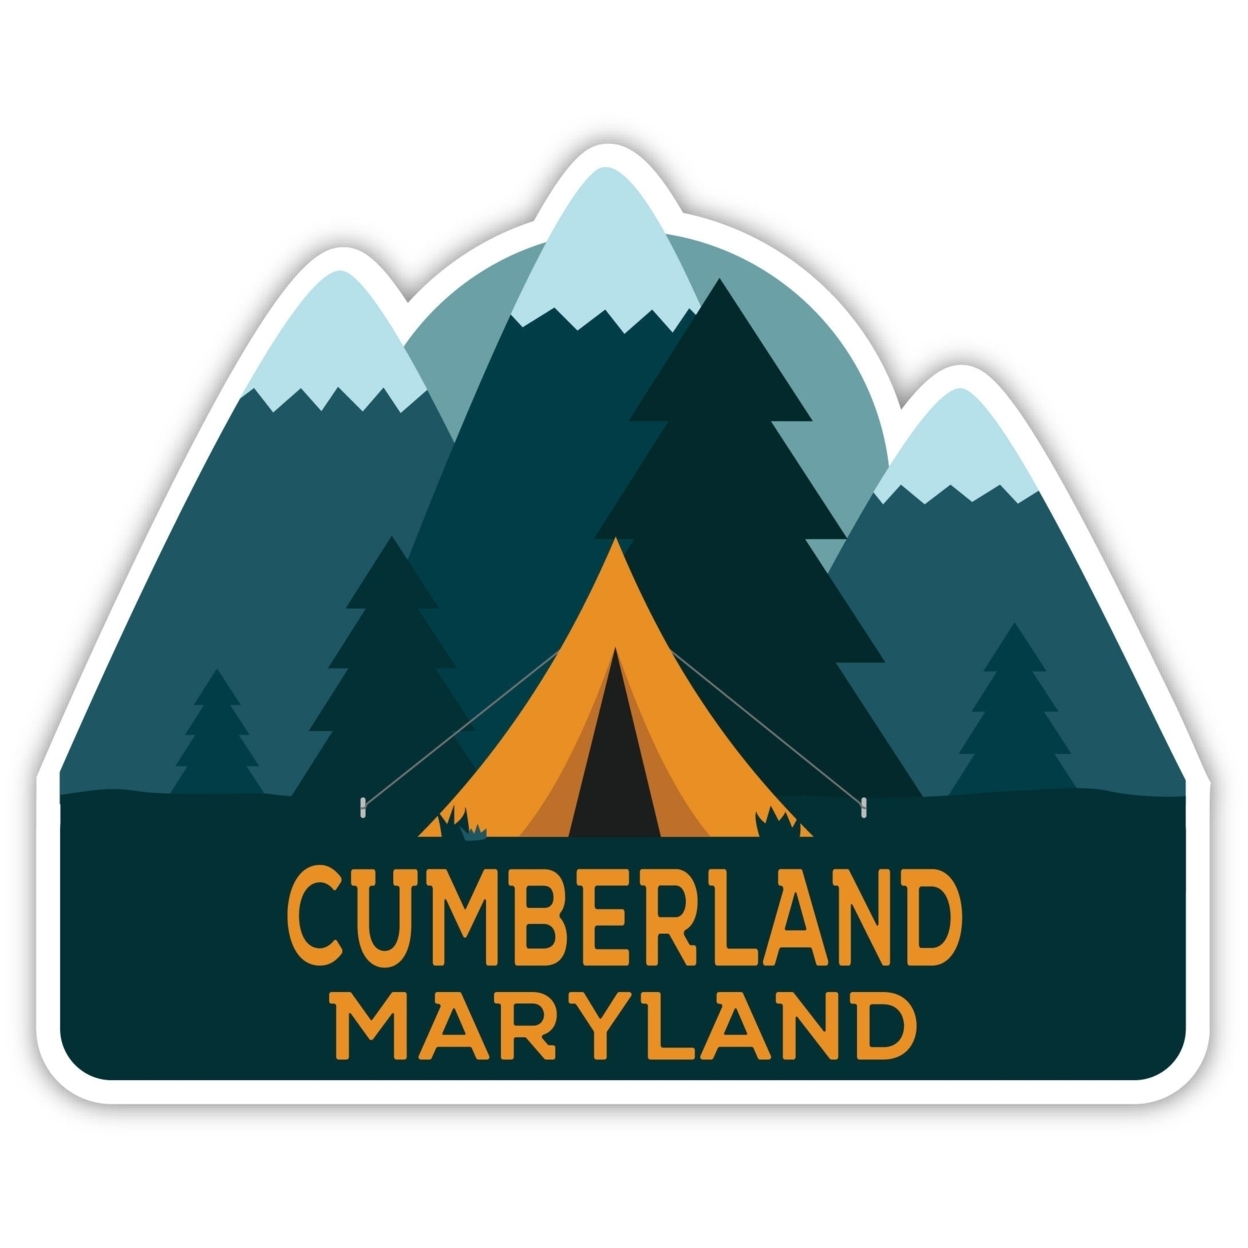 Cumberland Maryland Souvenir Decorative Stickers (Choose Theme And Size) - Single Unit, 6-Inch, Tent